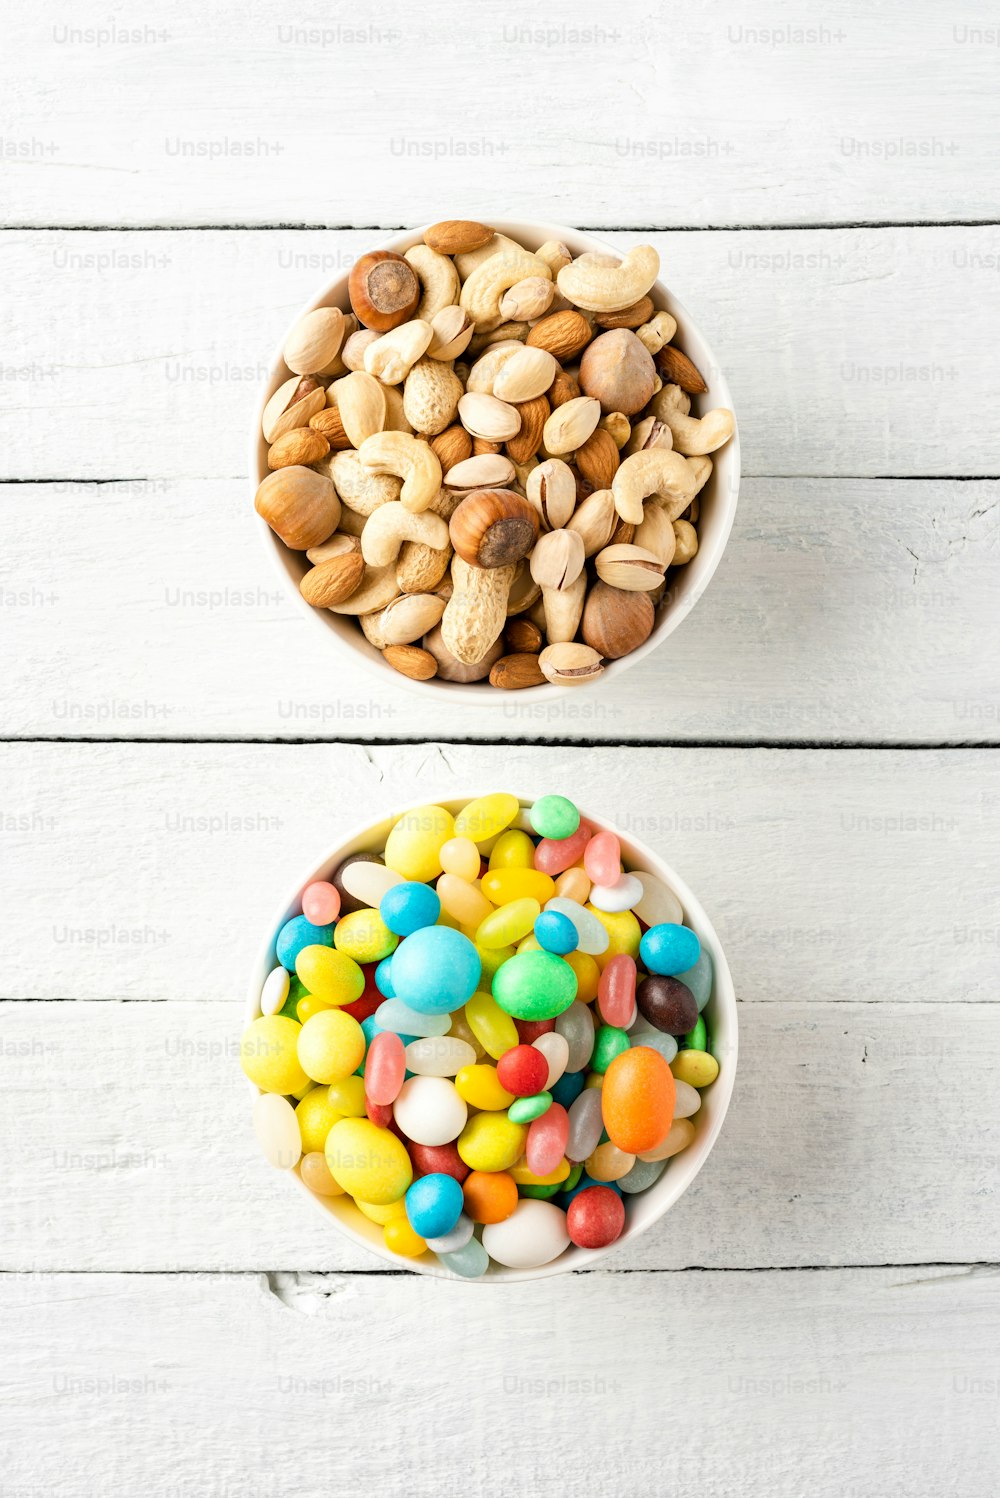 Healthy vs unhealthy food. Mixed nuts and candies in bowls on white wooden background. Top view